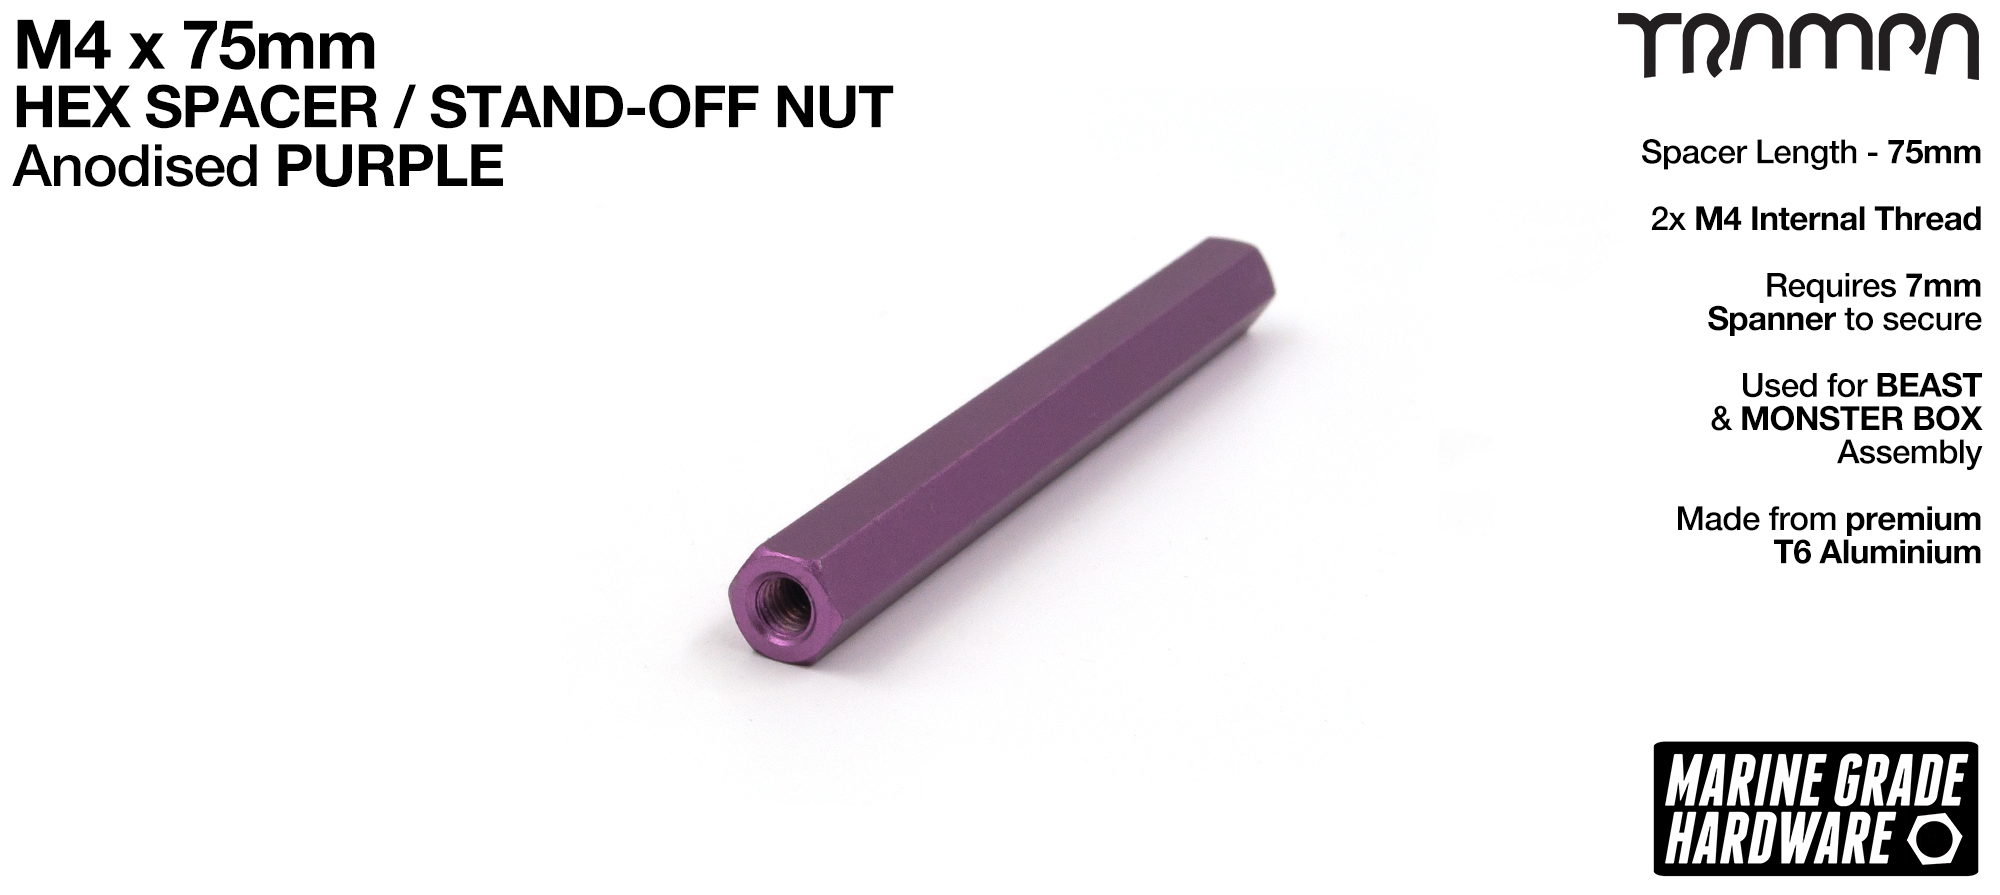 M4 x 75mm Aluminium Threaded HEX Spacer Nut used for assembling the MONSTER Battery Boxes - PURPLE